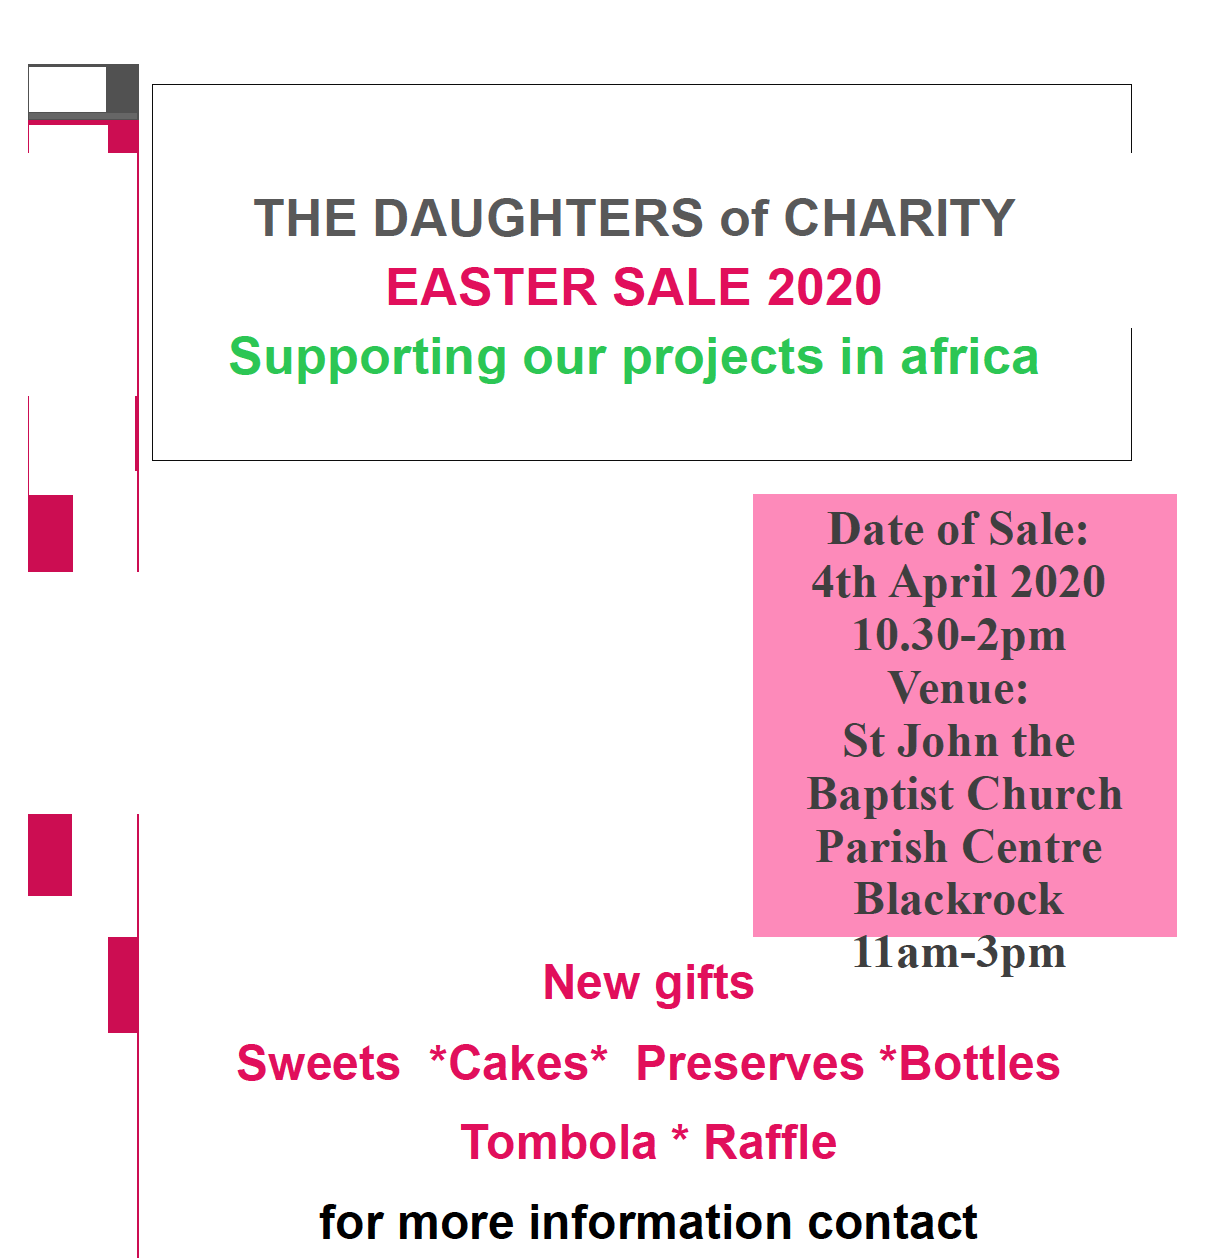 THE DAUGHTERS of CHARITY EASTER SALE 2020